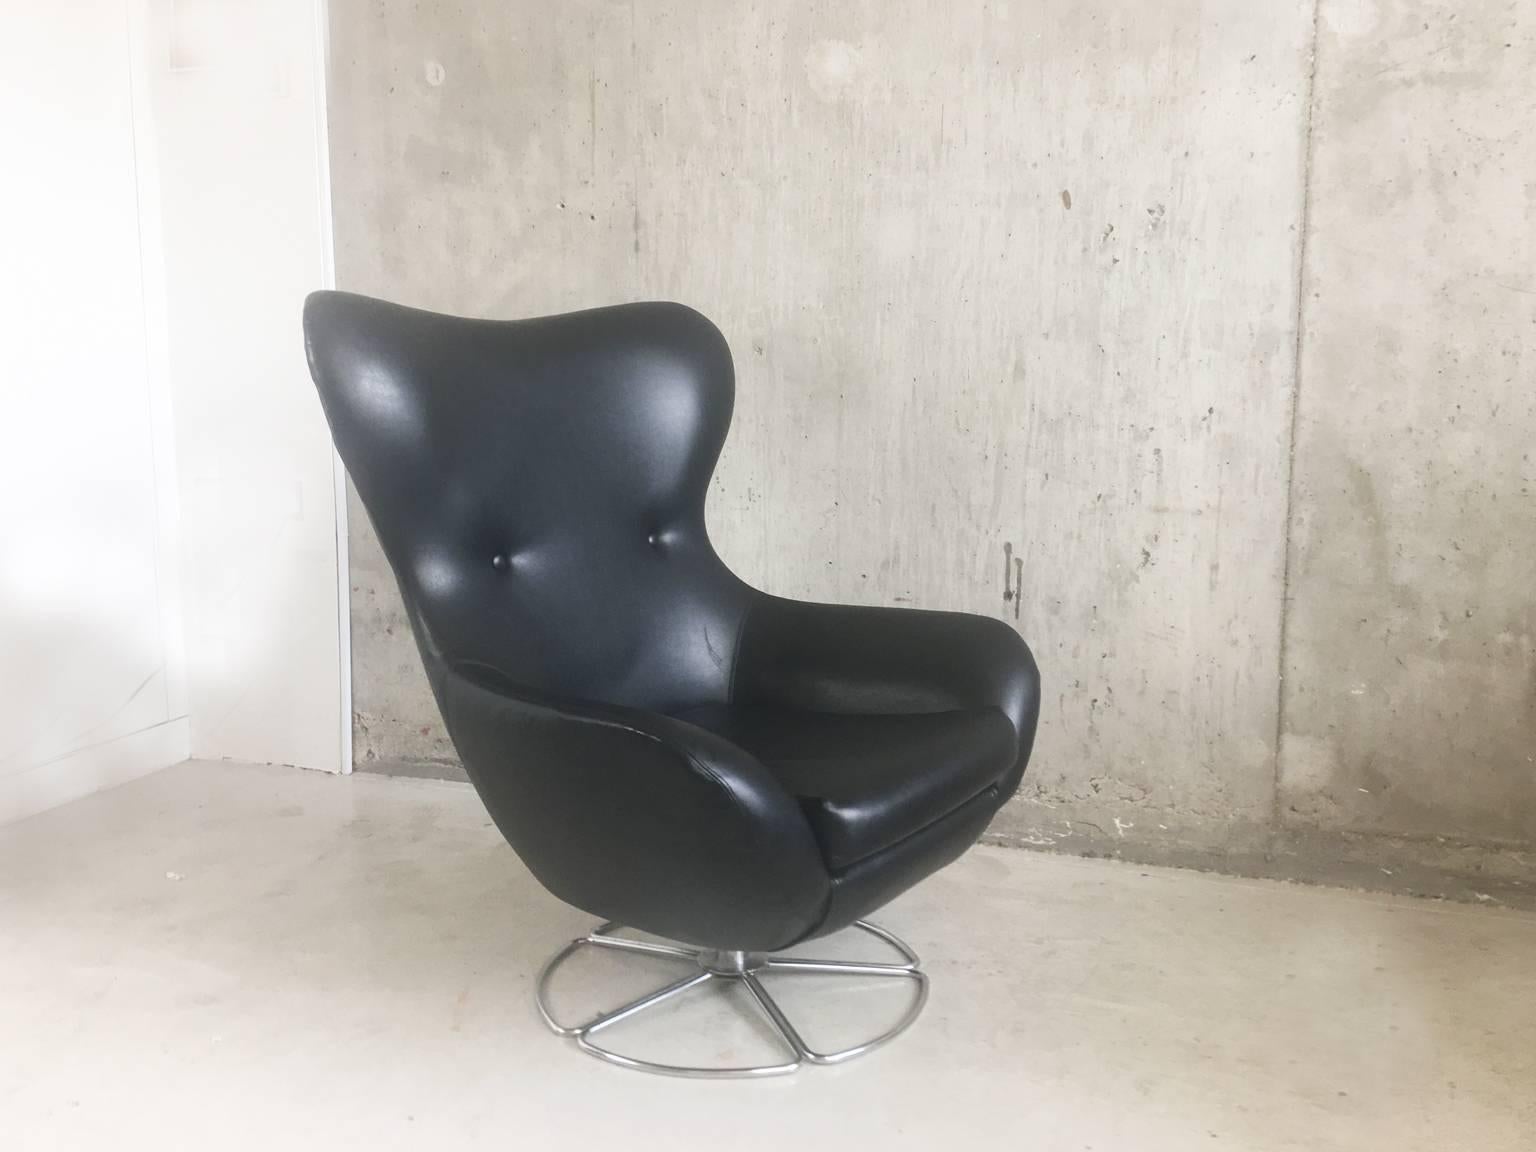 Plated 1970s Mid-Century Large Black Vinyl Lounge Chair For Sale